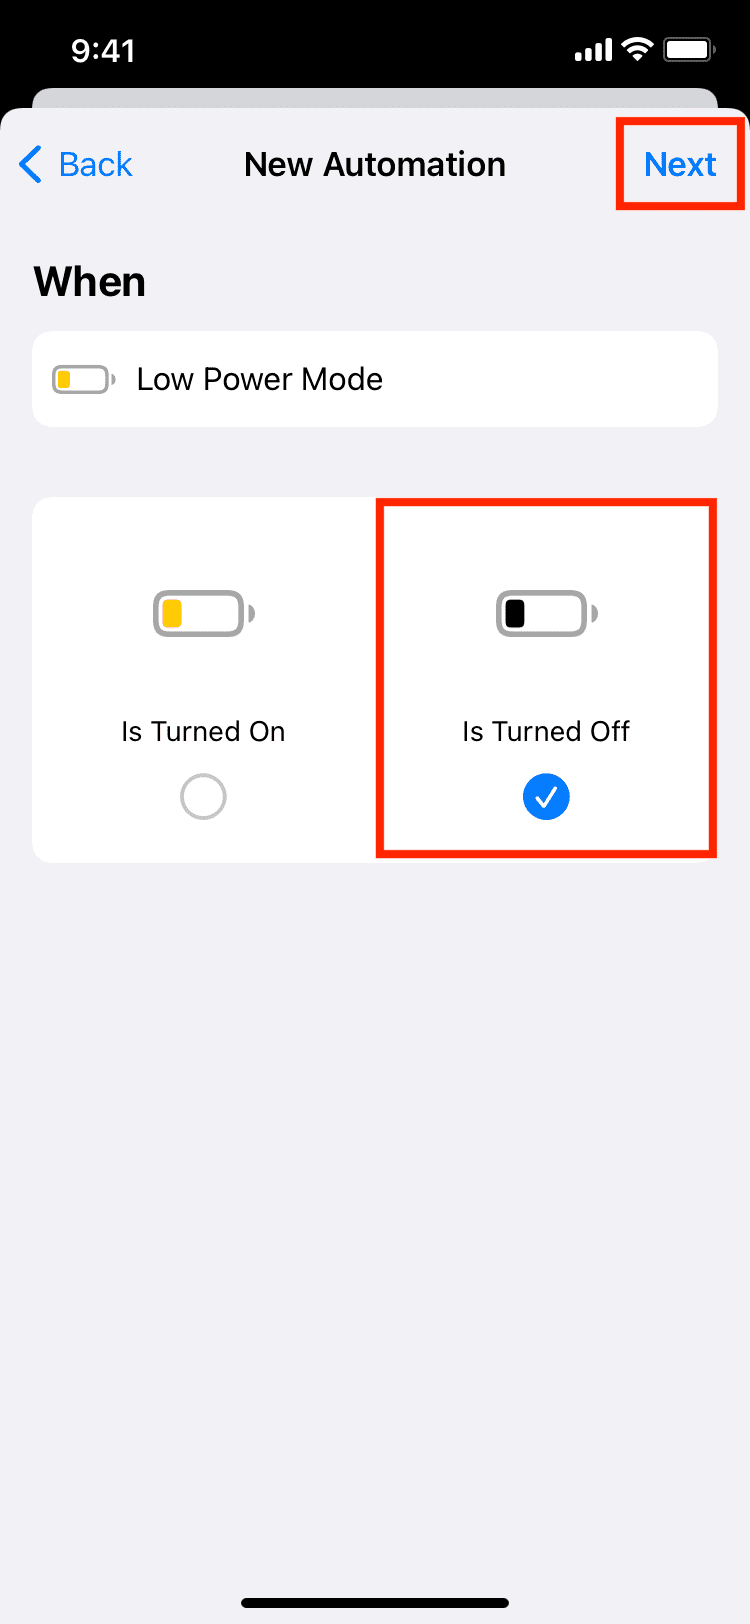 Choose Low Power Mode is turned off